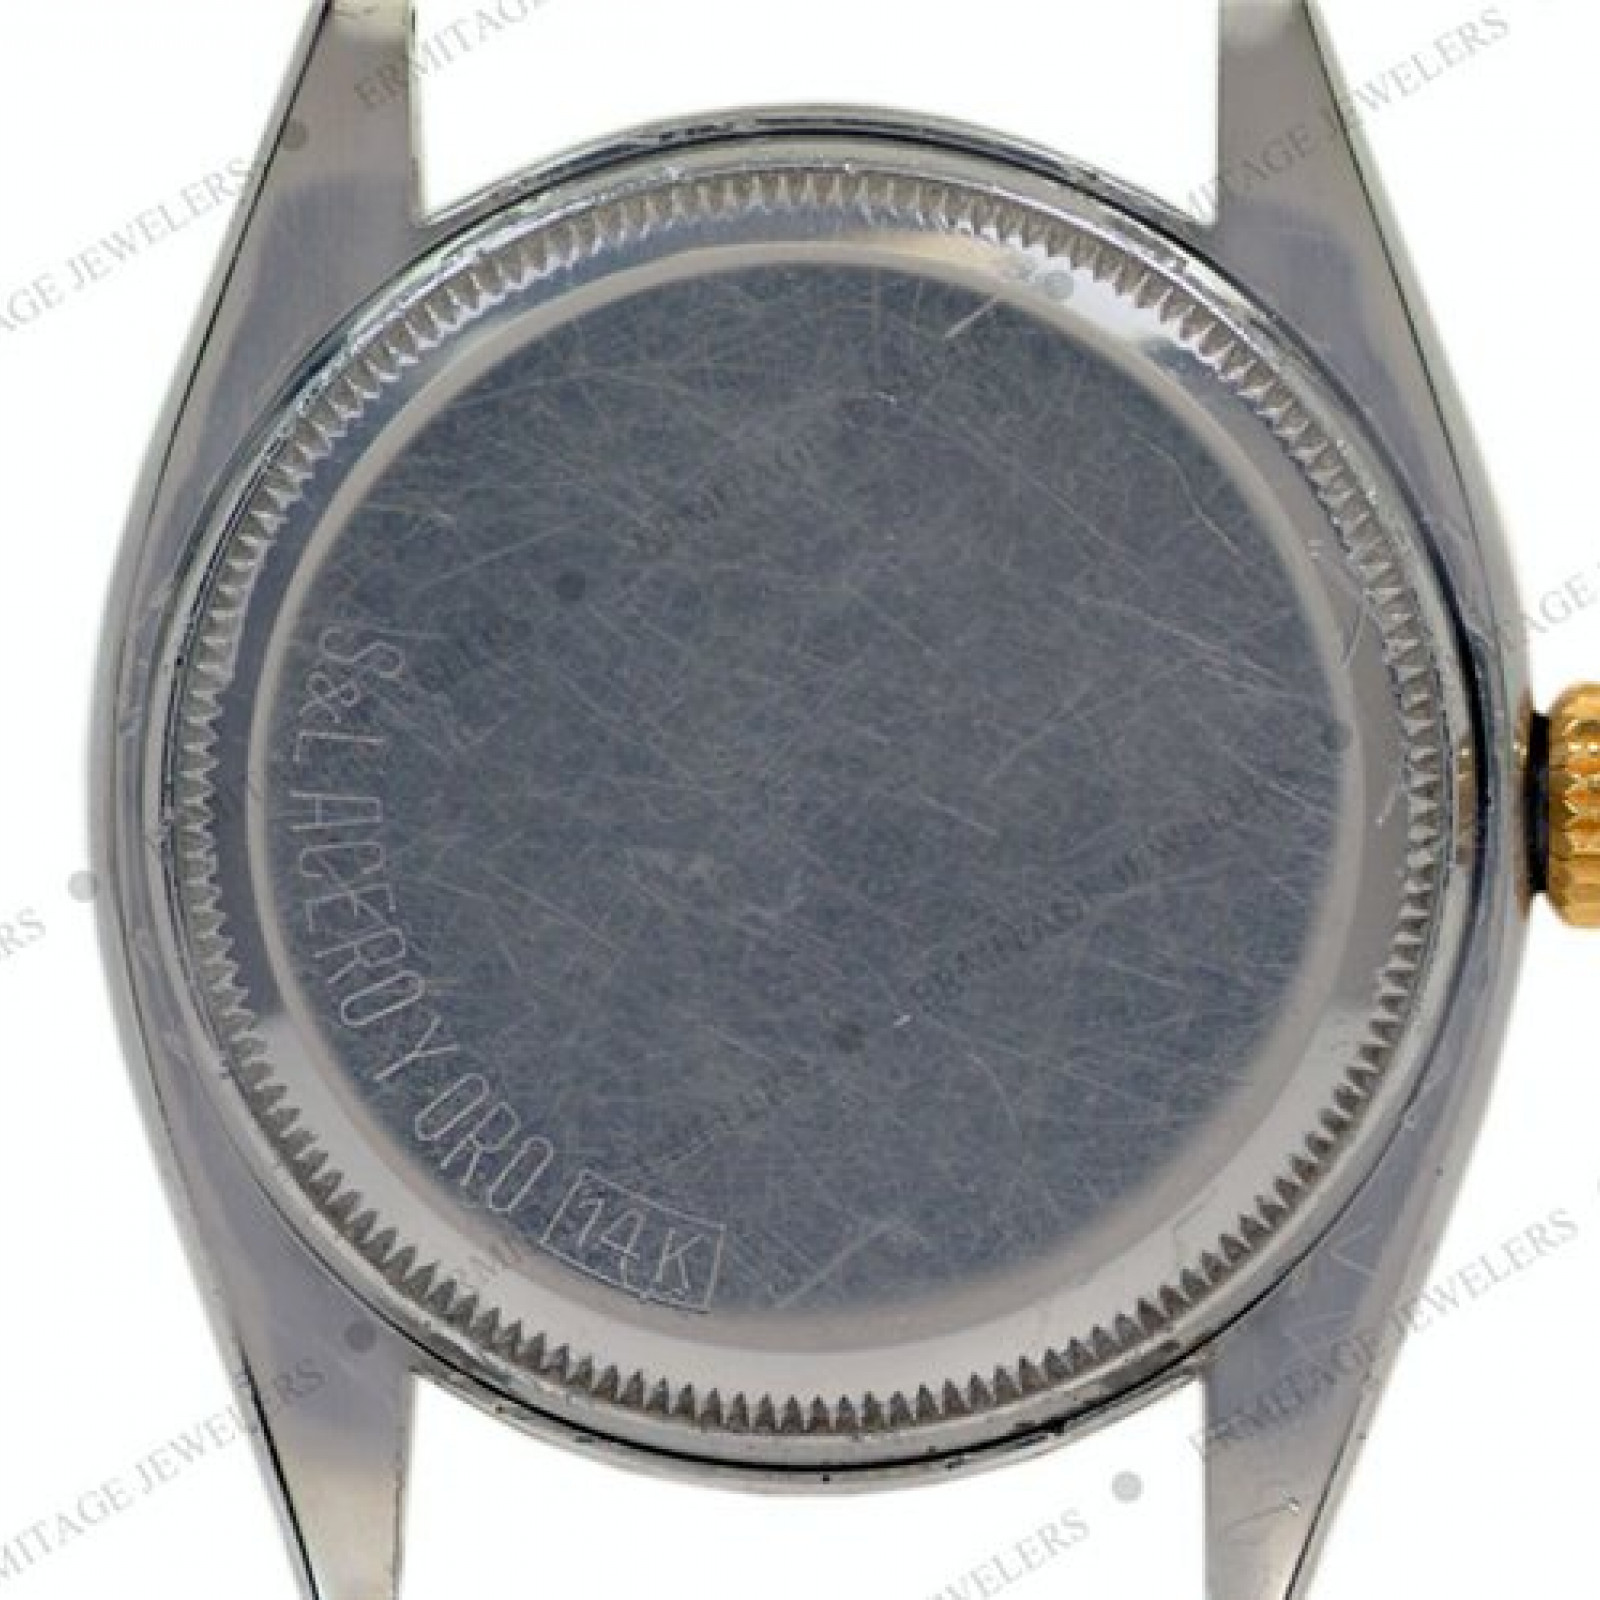 Vintage Rolex Oyster Perpetual 6582